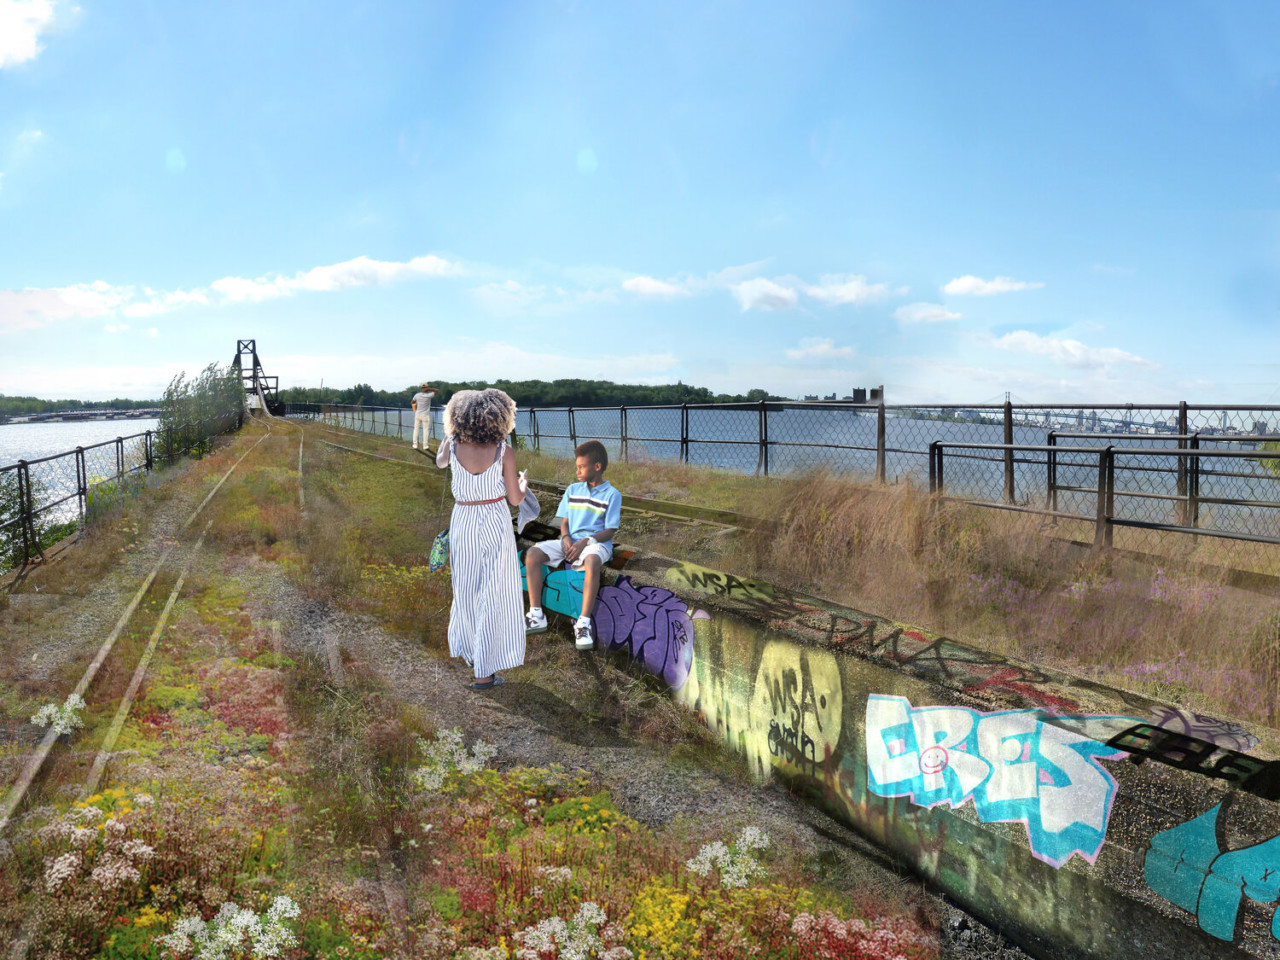 Rendering of the new graffiti pier with a wedding couple on it